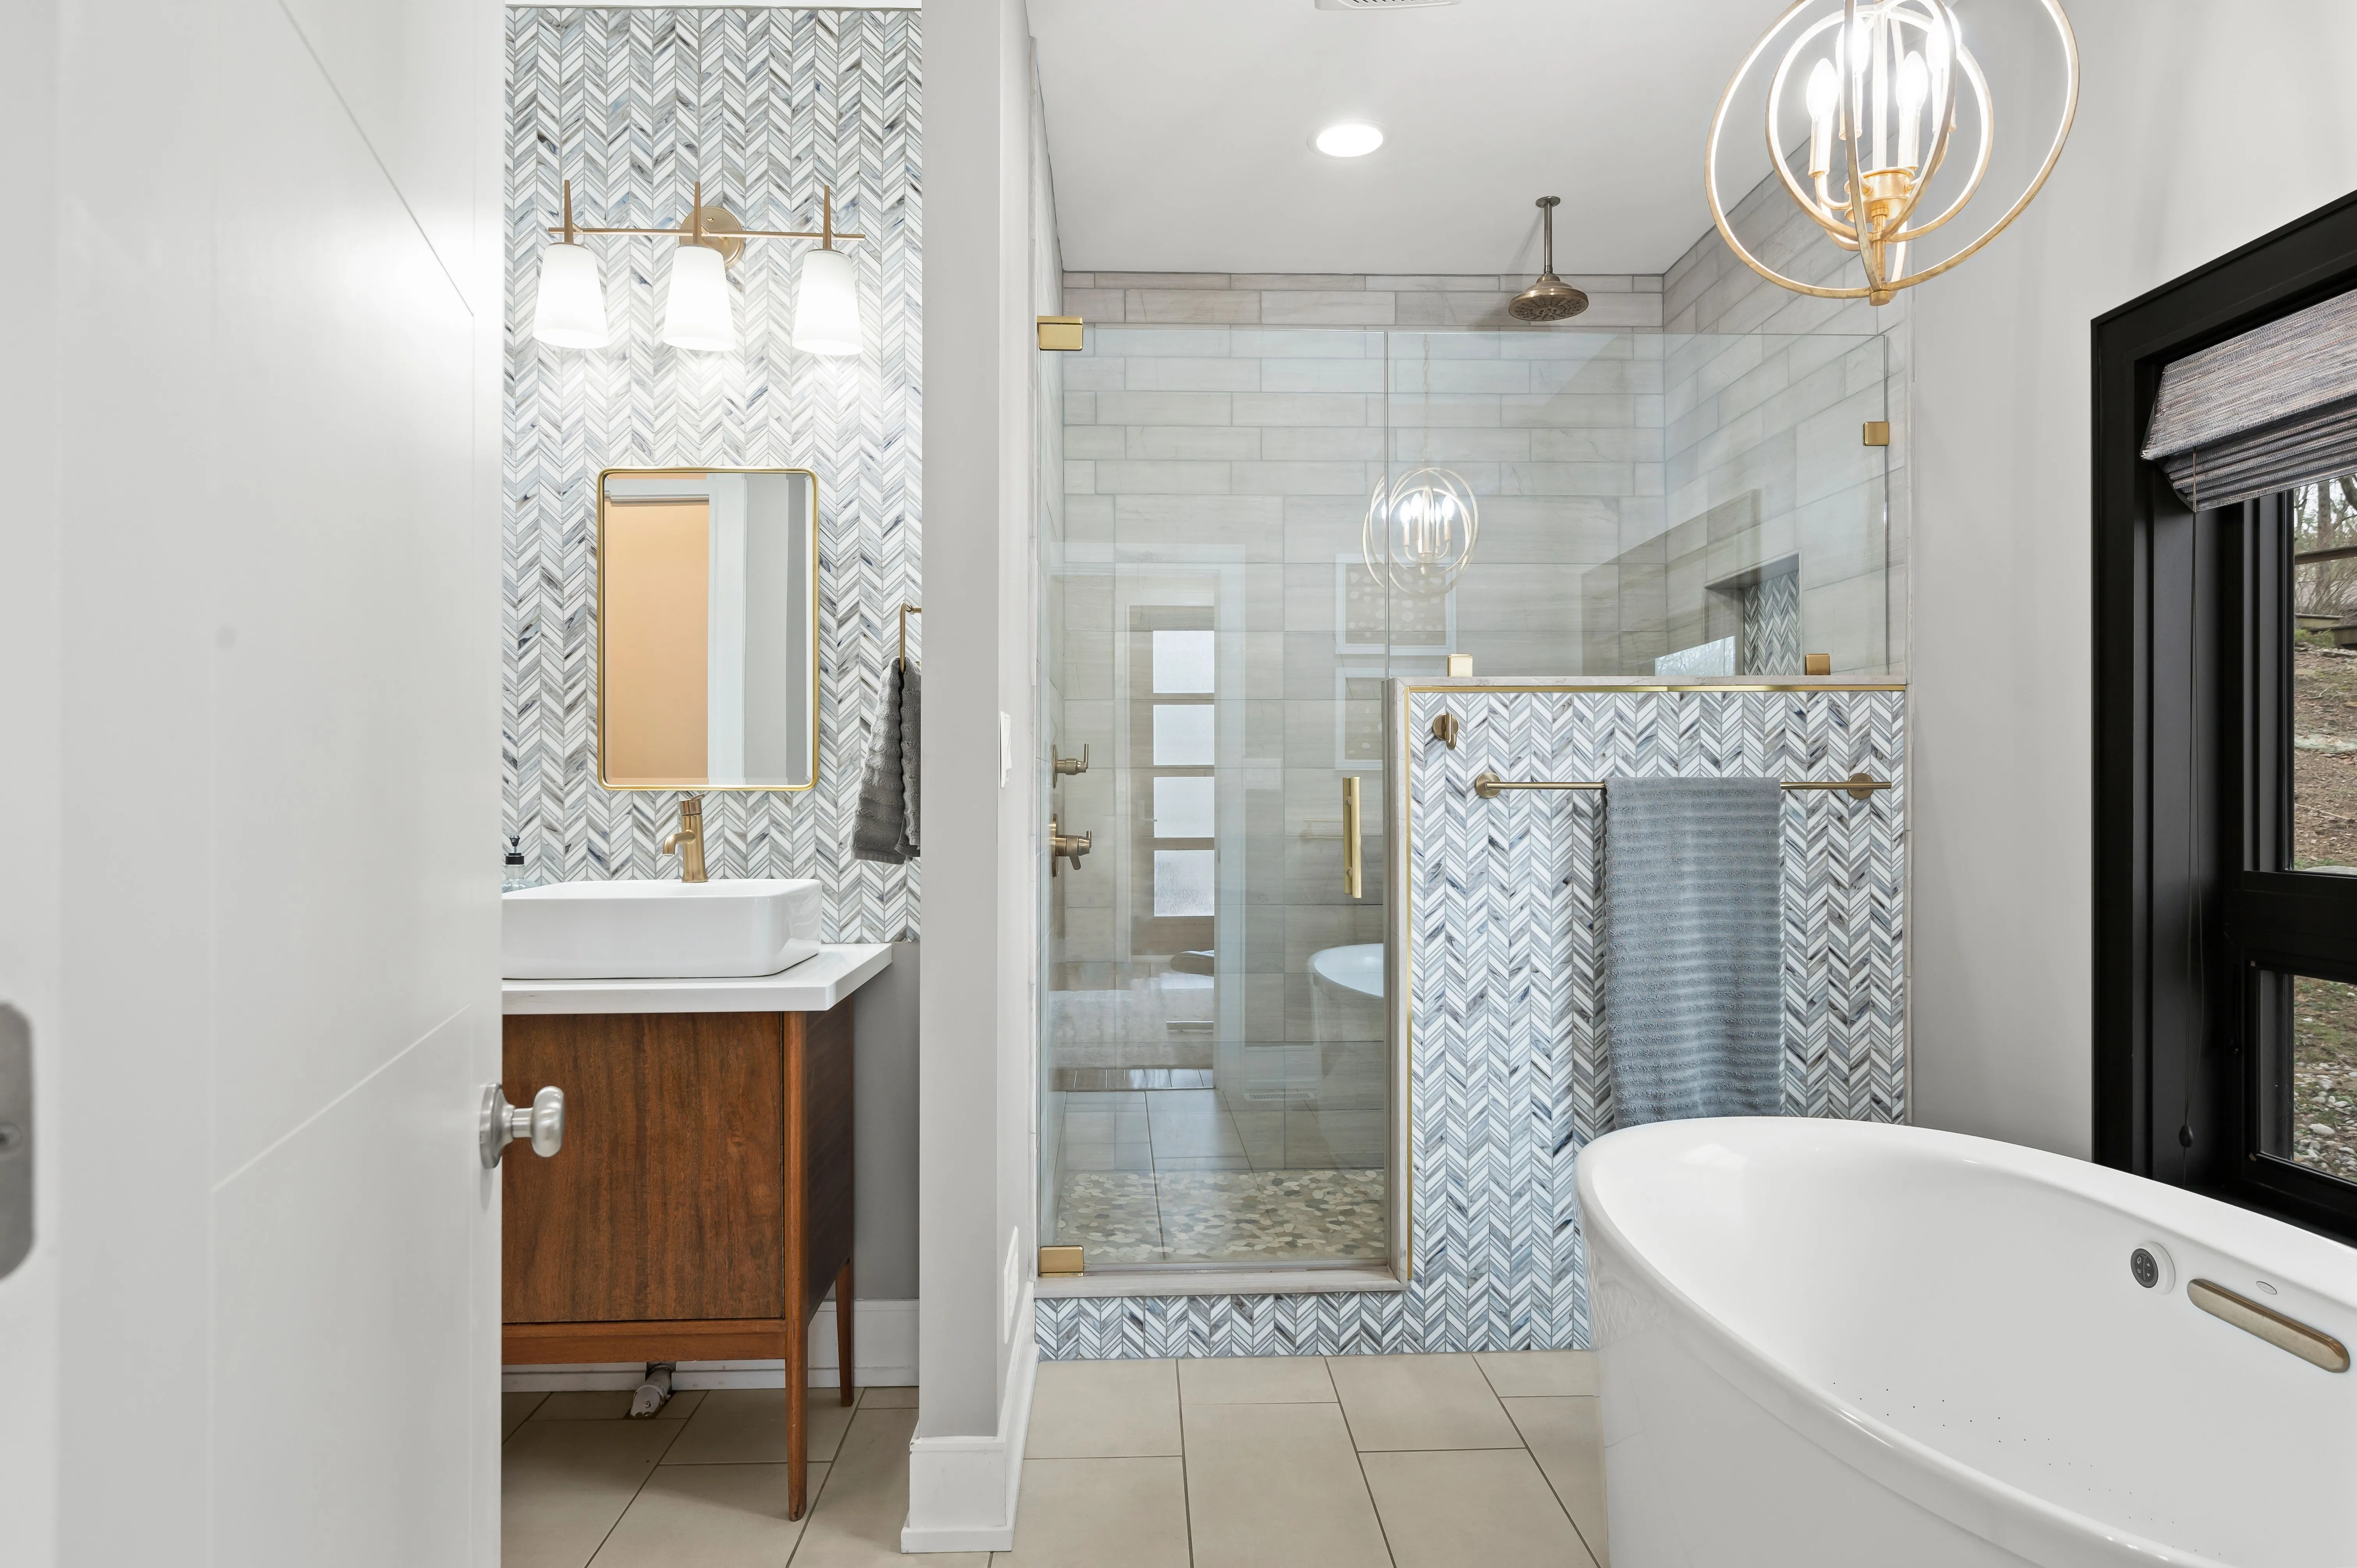 Modern bathroom interior with a freestanding tub, glass shower, patterned tiles, and elegant lighting.